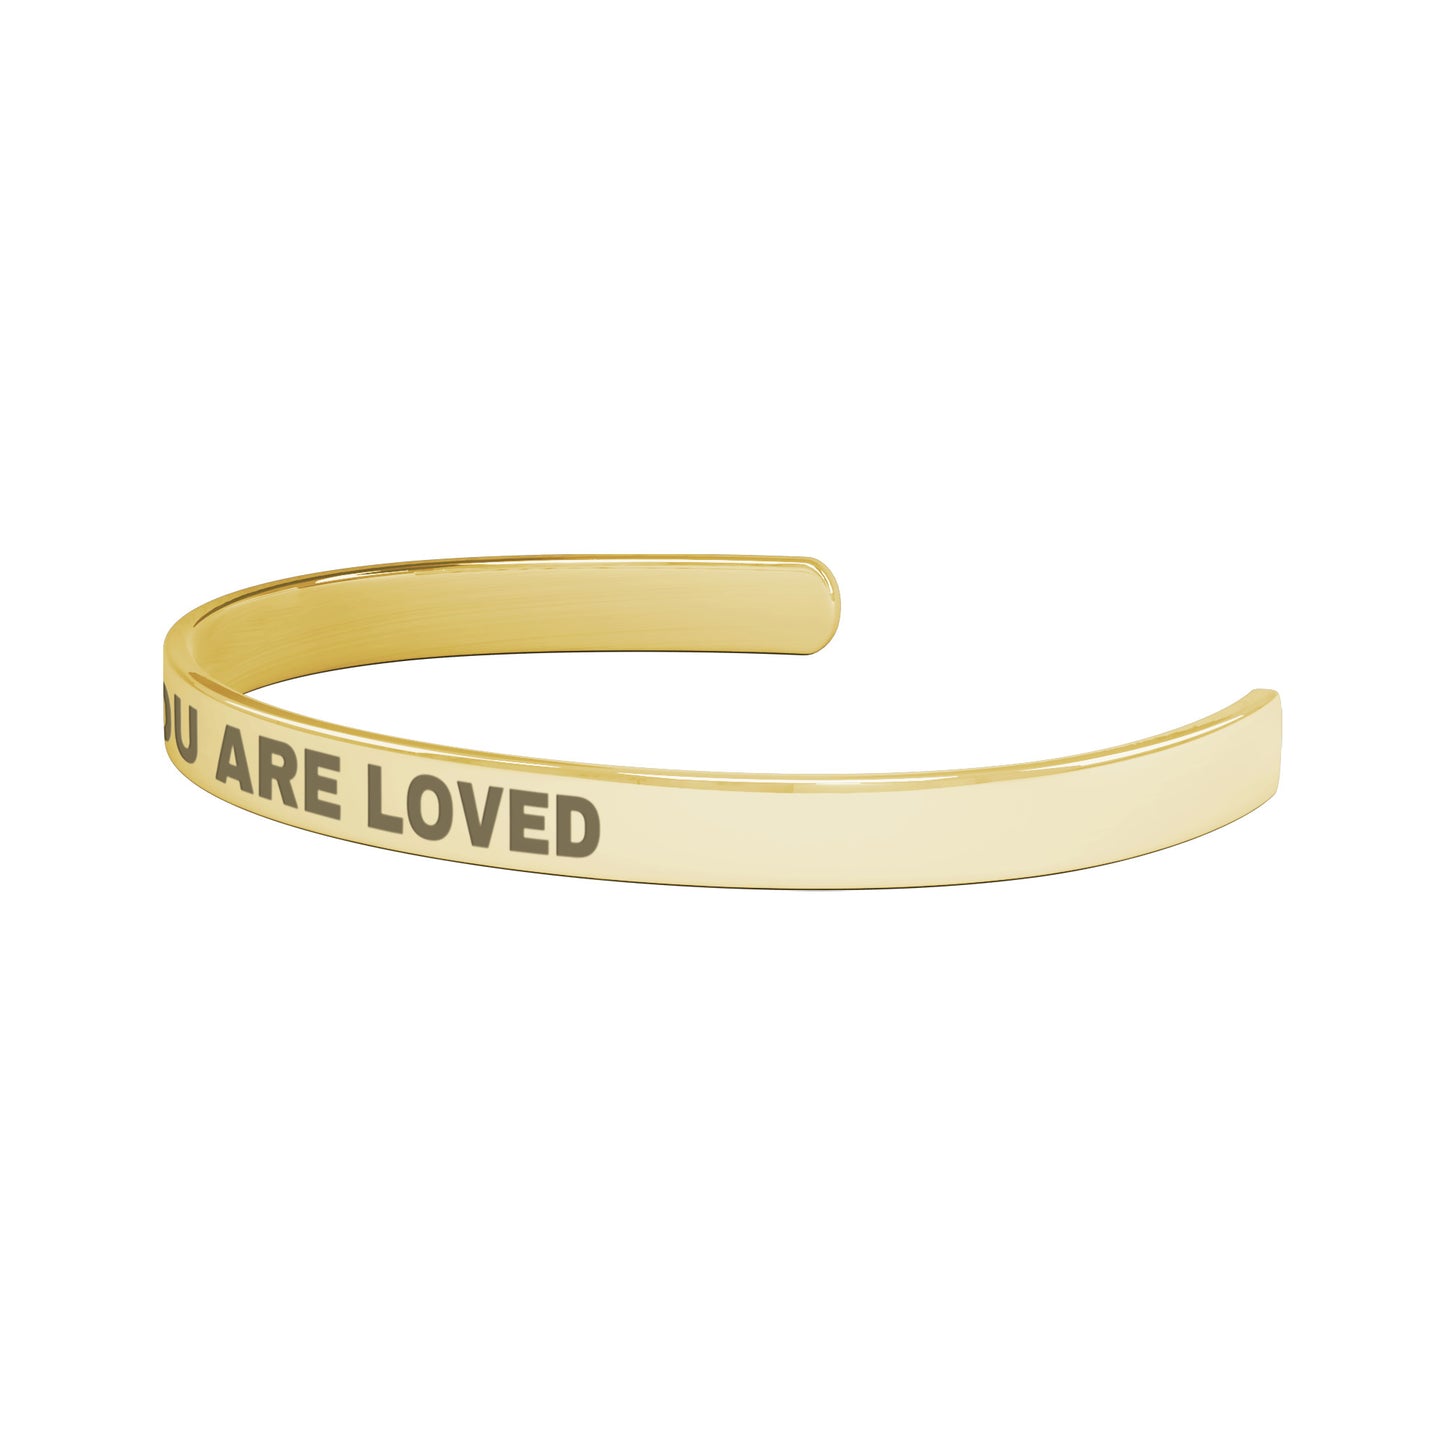 YOU ARE LOVED | CUFF BRACELET